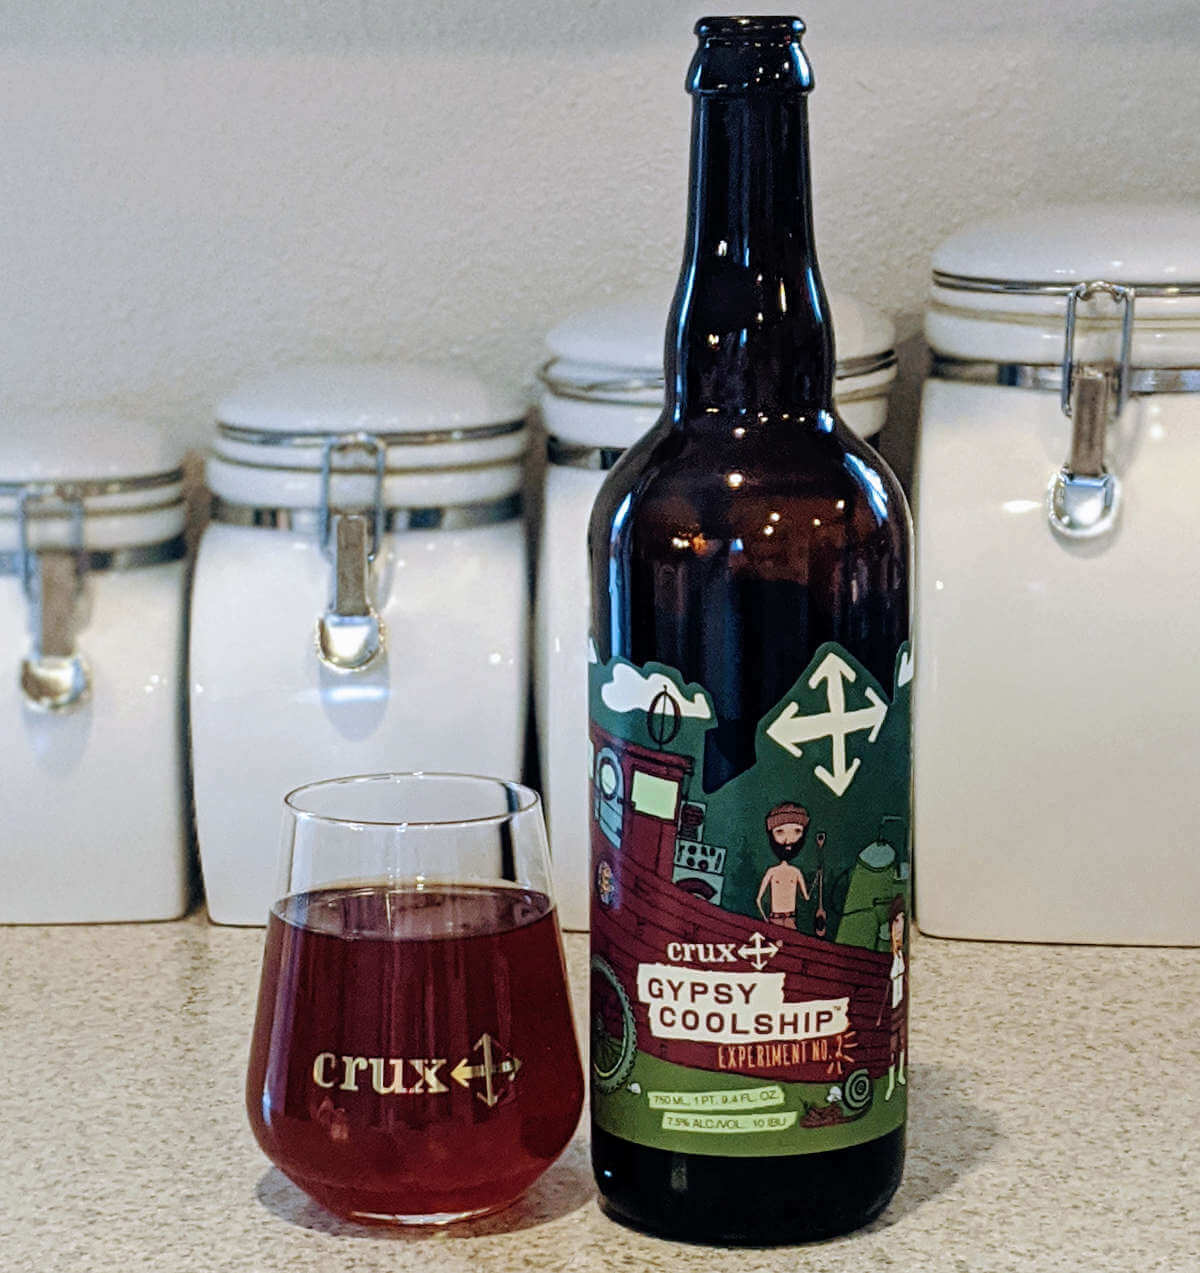 Latest print article: Crux Fermentation Project’s Gypsy Coolship No. 2